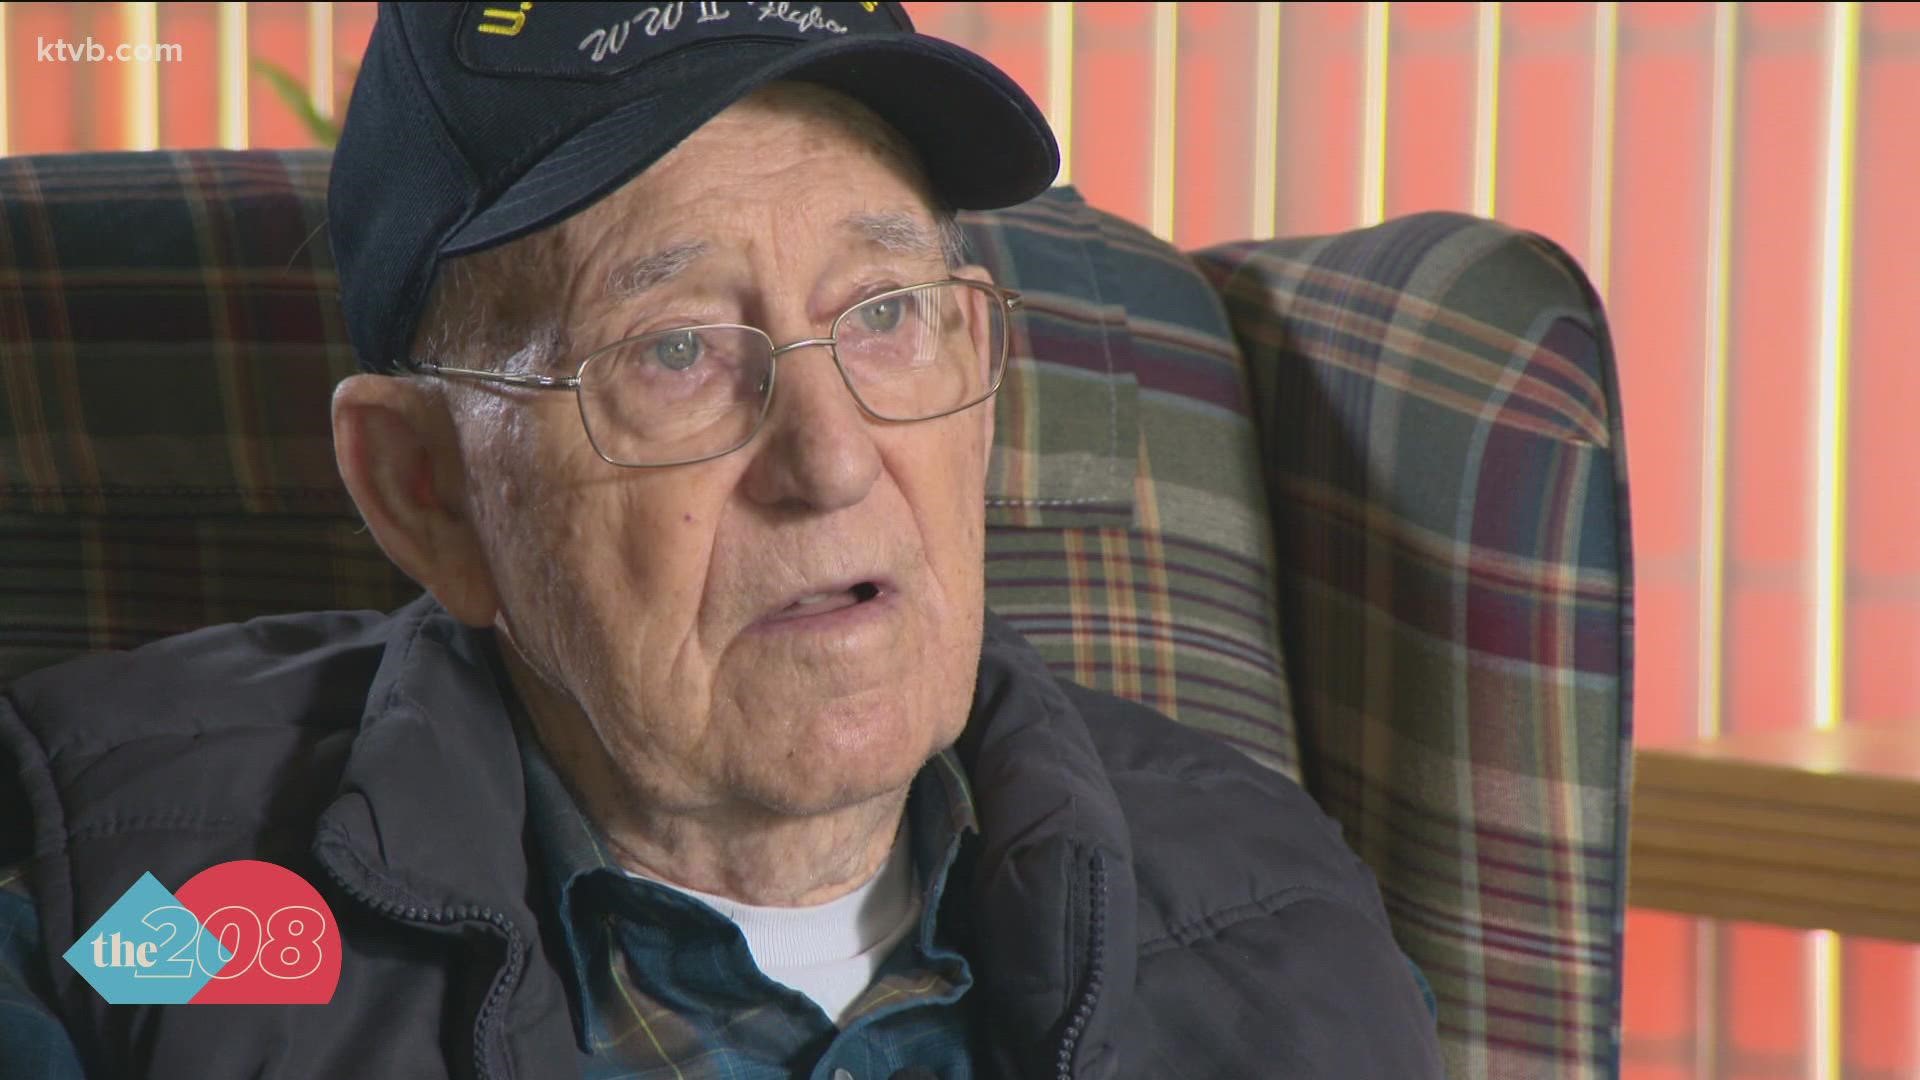 At 97 years old, Hugh Mayse boarded a plane for the first time in twenty years when he climbed aboard the Dream Flight.